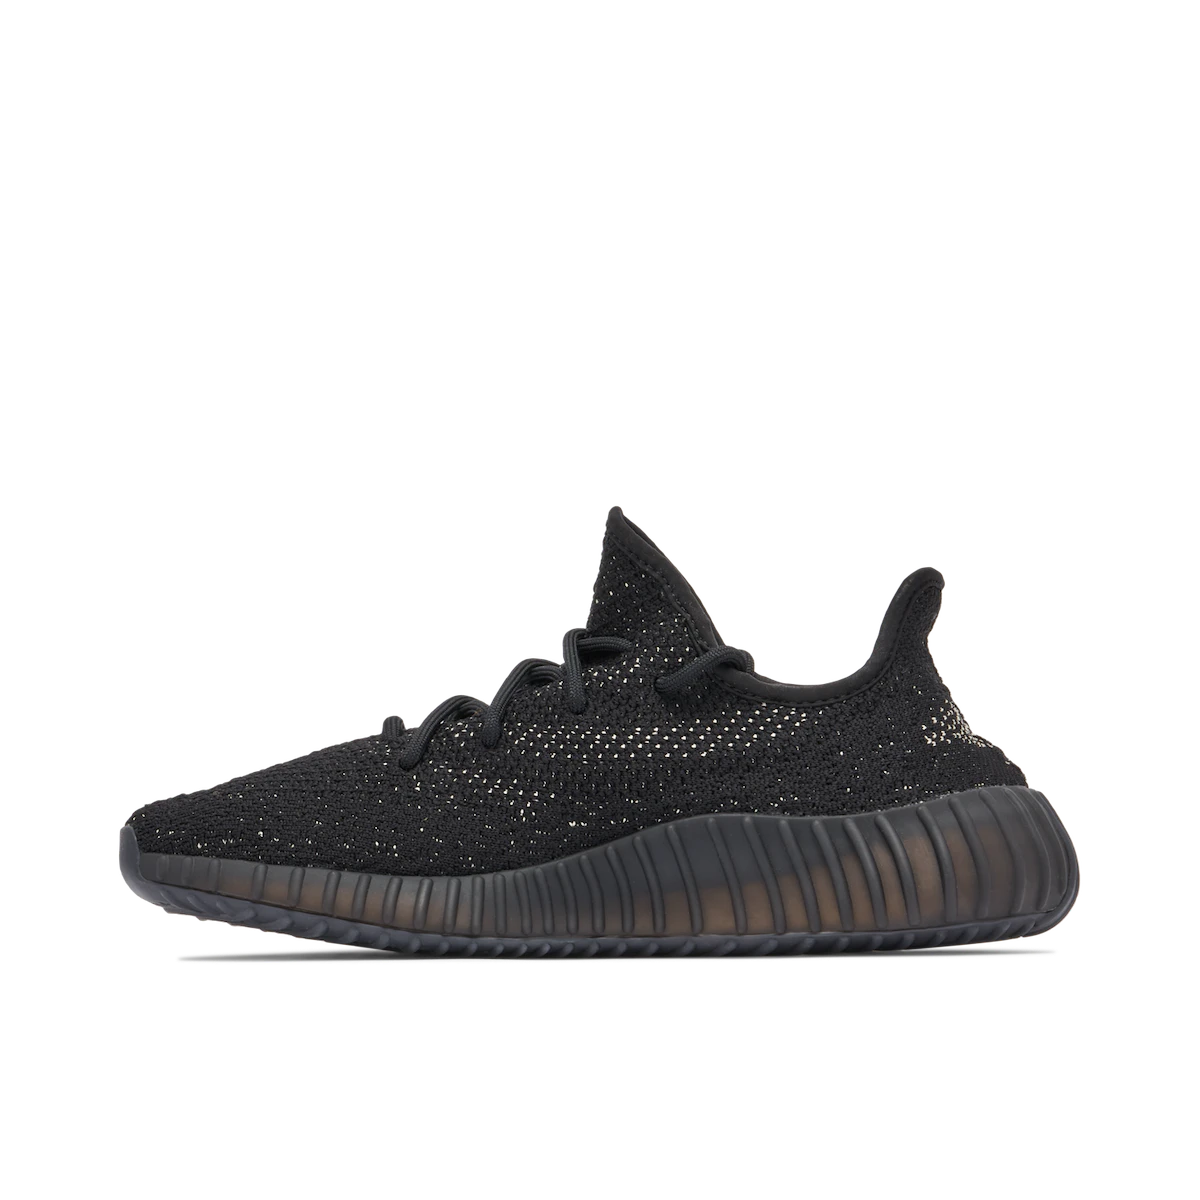 Adidas Yeezy Boost 350 V2 Core Black White Oreo by Yeezy from £375.00